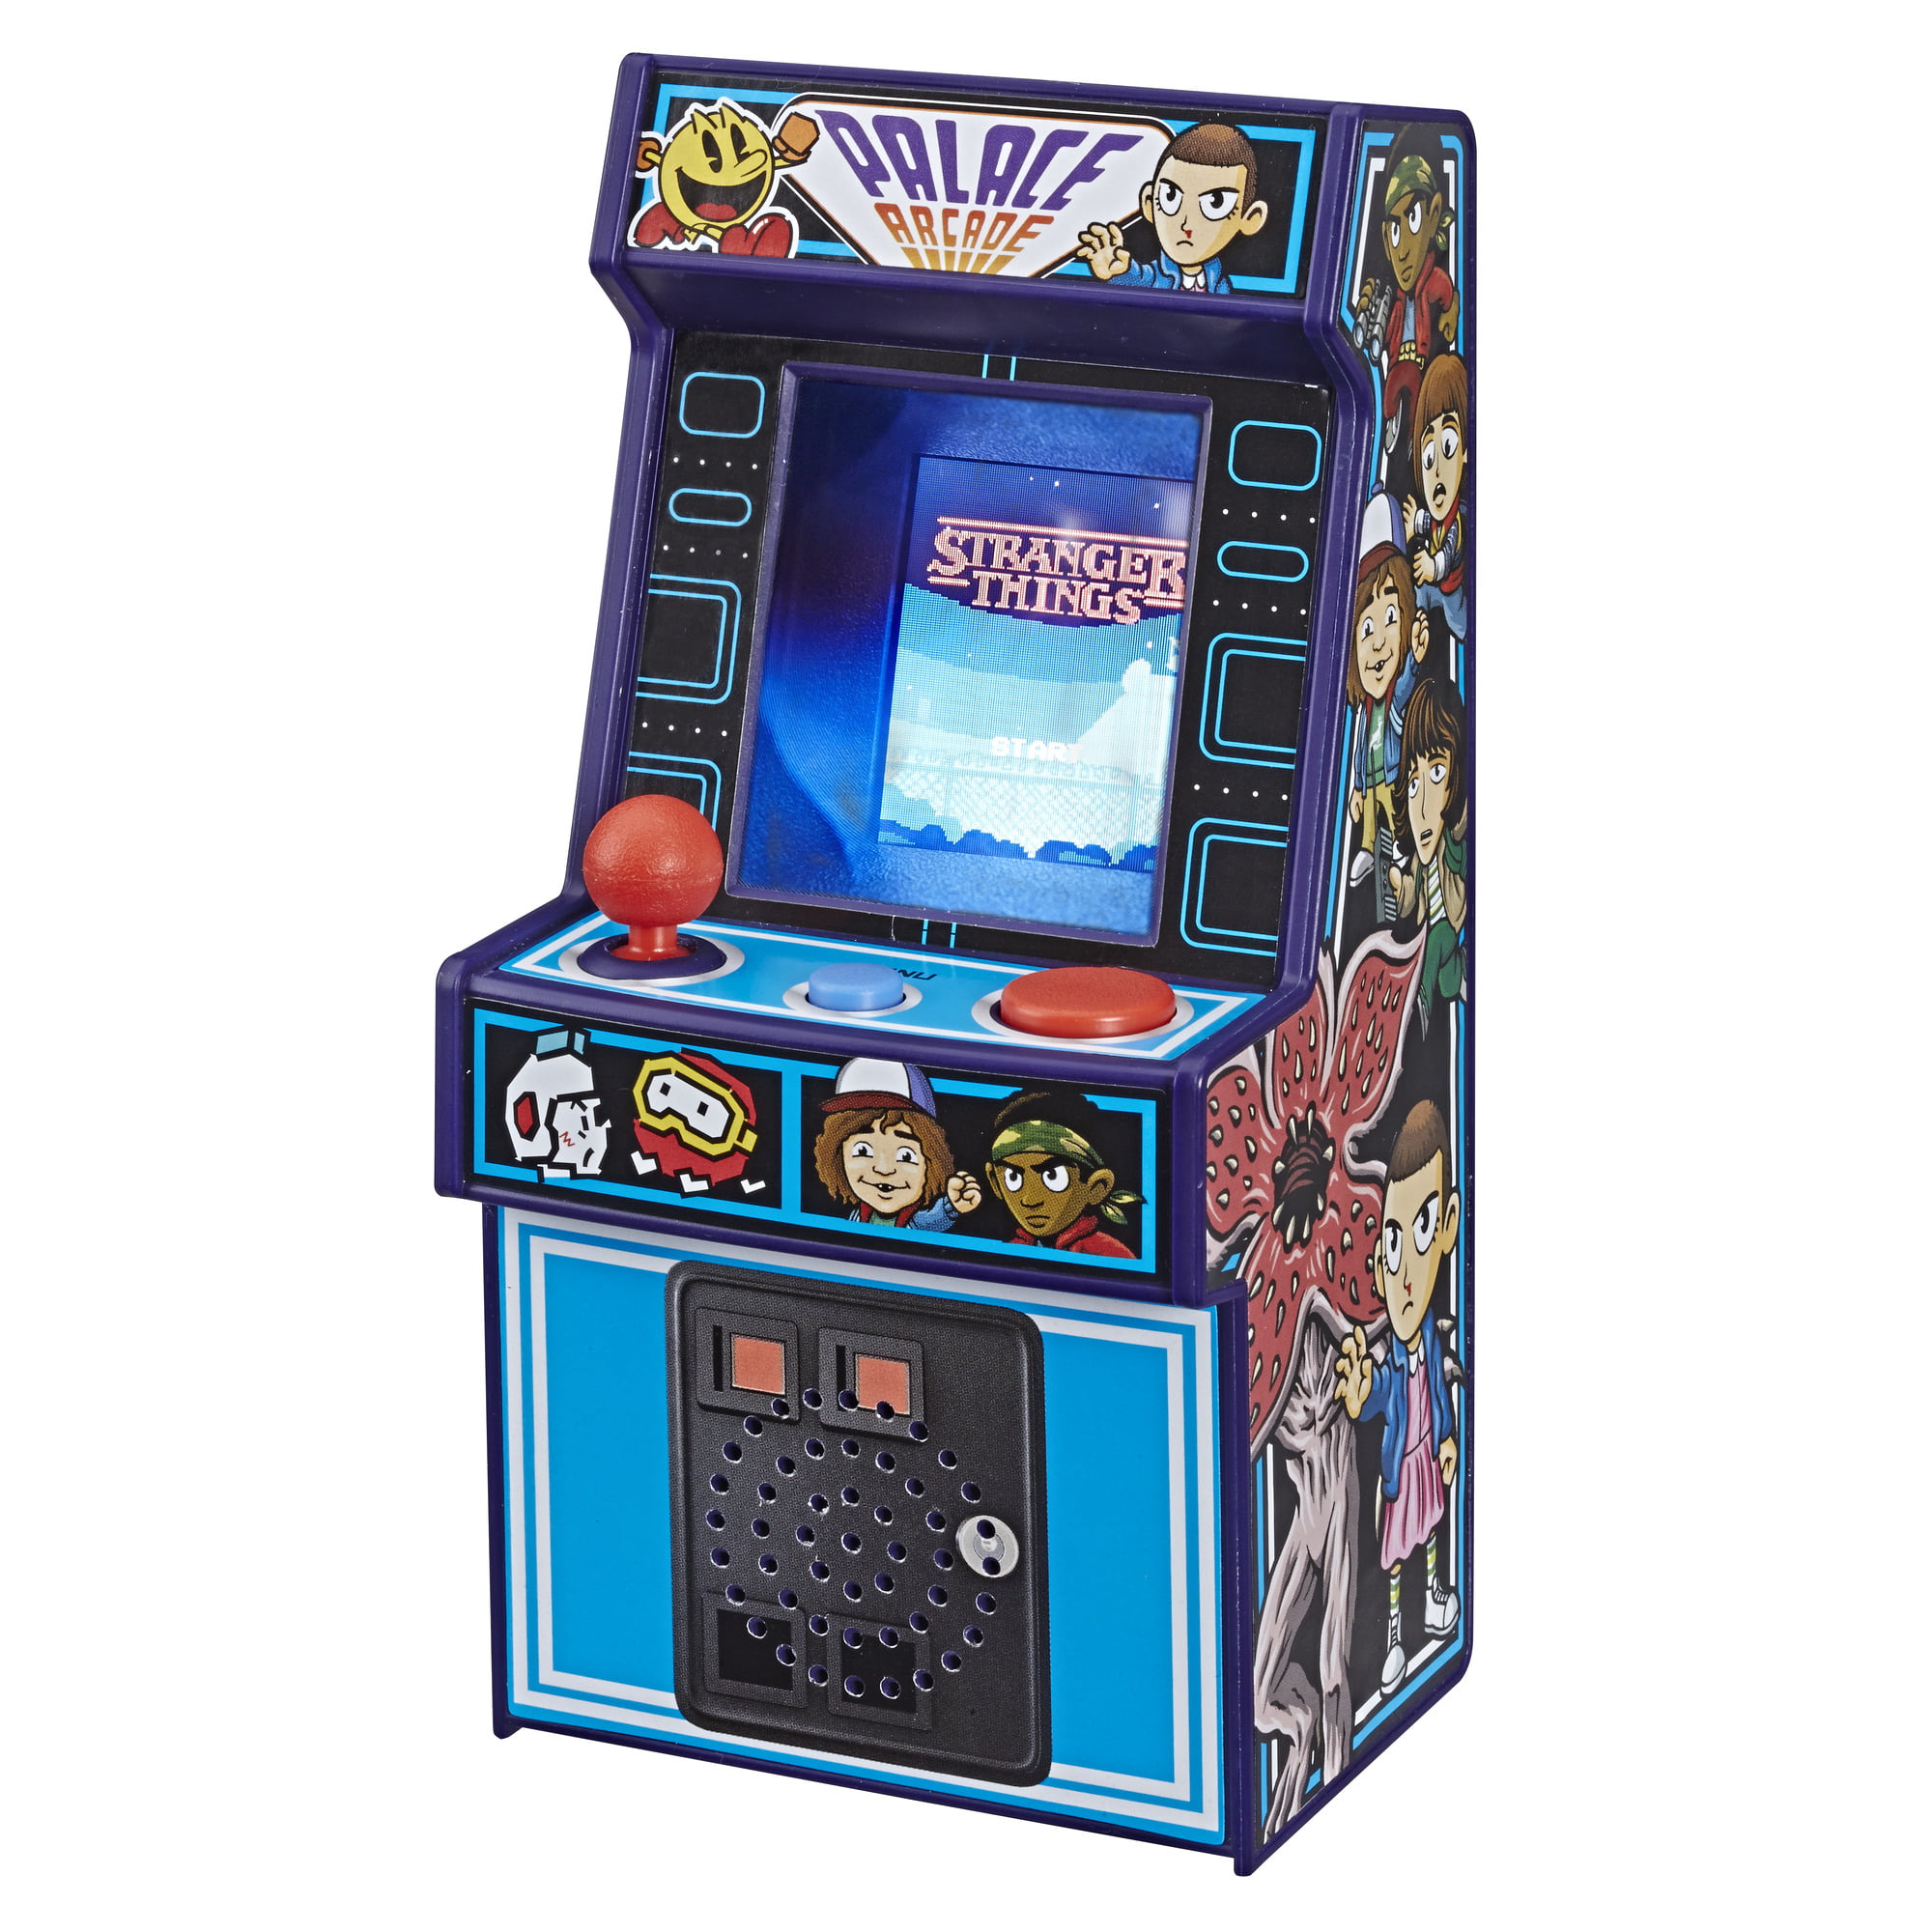 Hasbro Stranger Things Palace Arcade Handheld Electronic Game Multicoloured E5640 for sale online 